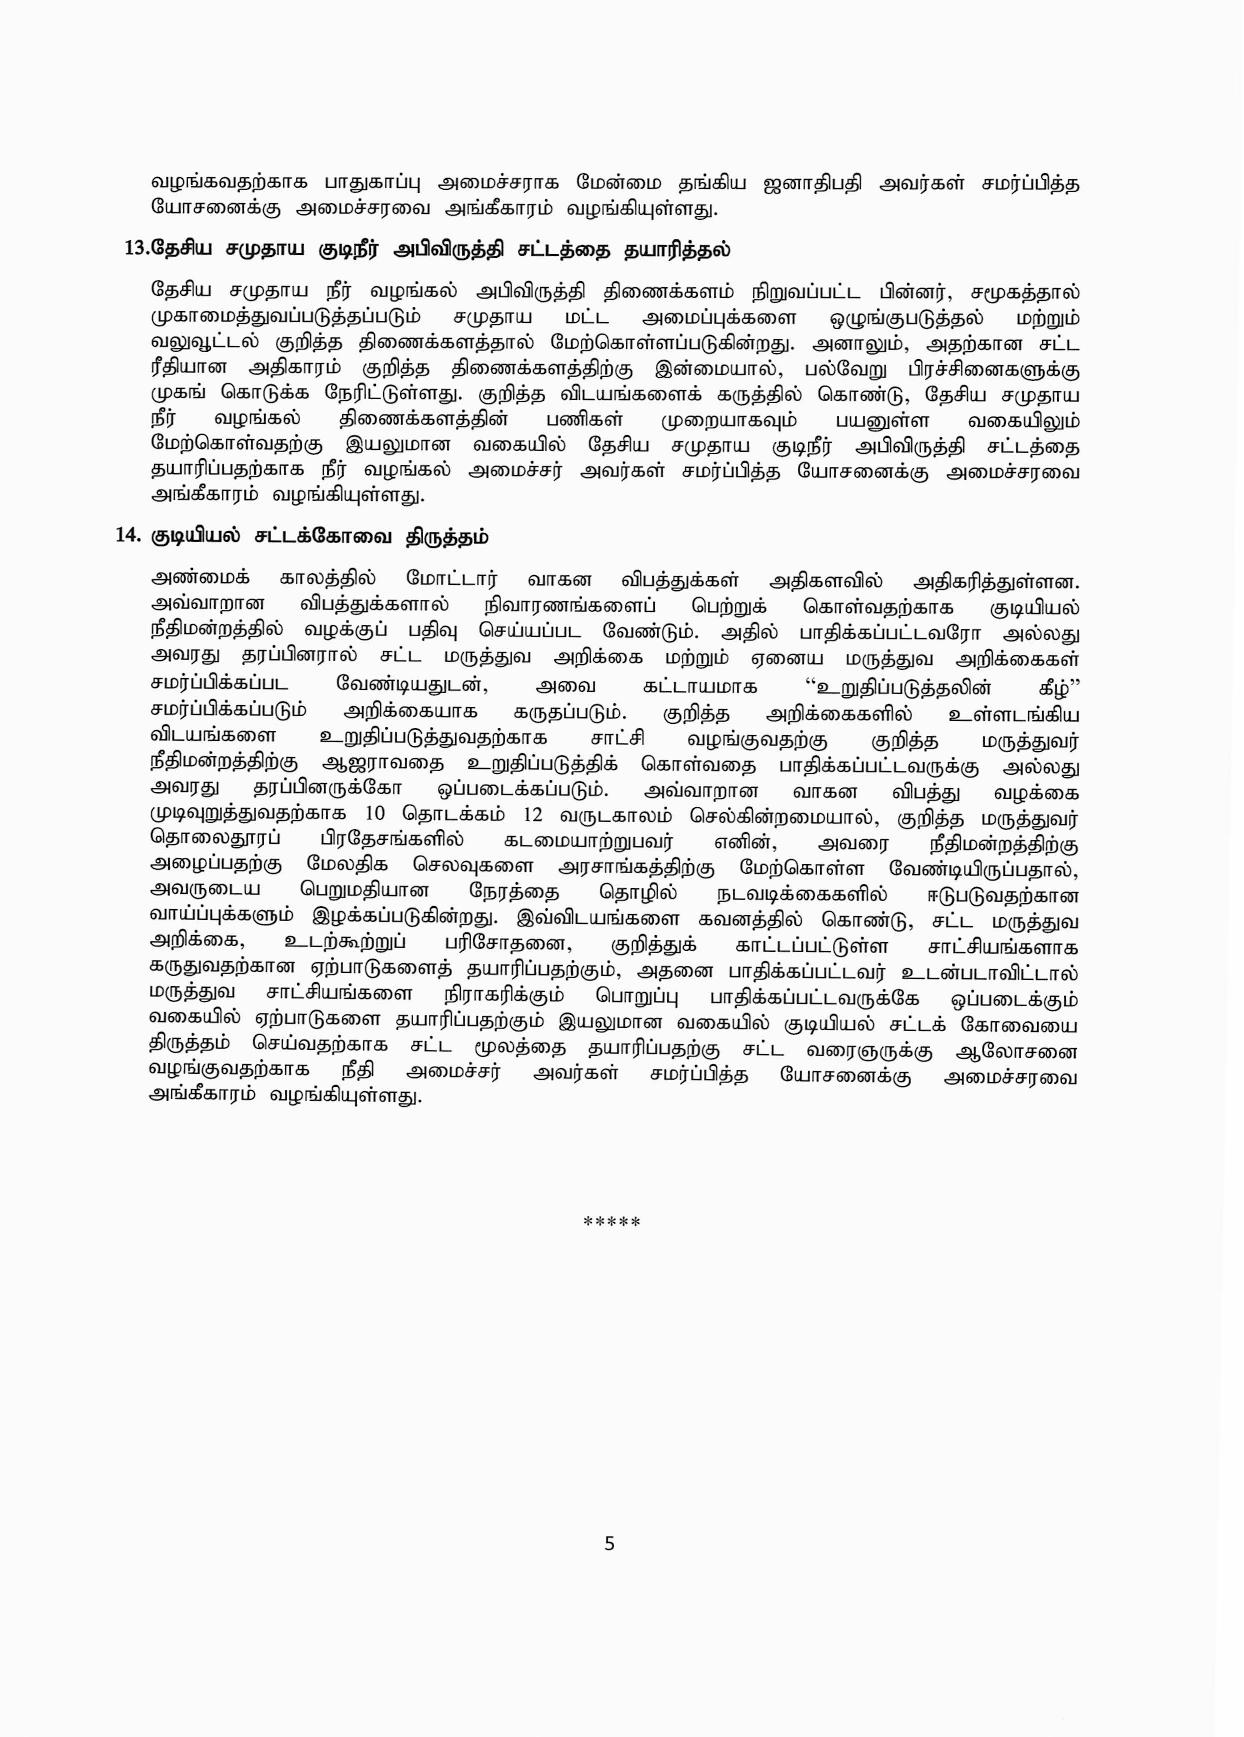 Cabinet Decision on 29.03.2021 Tamil page 005